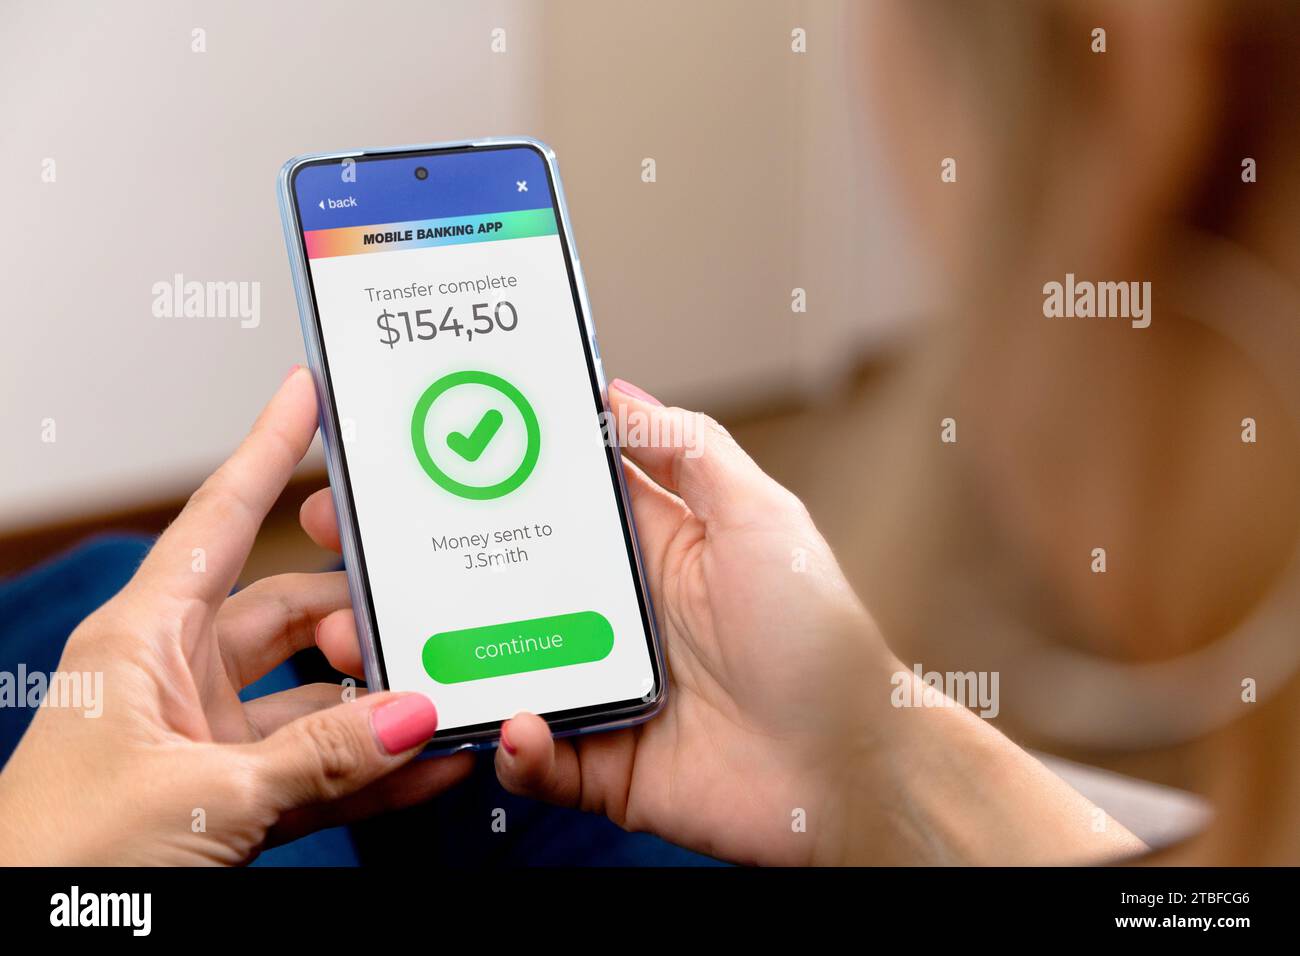 Online transaction complete. Woman holding a mobile phone with a financial application on screen.A person who transfers money online using application Stock Photo